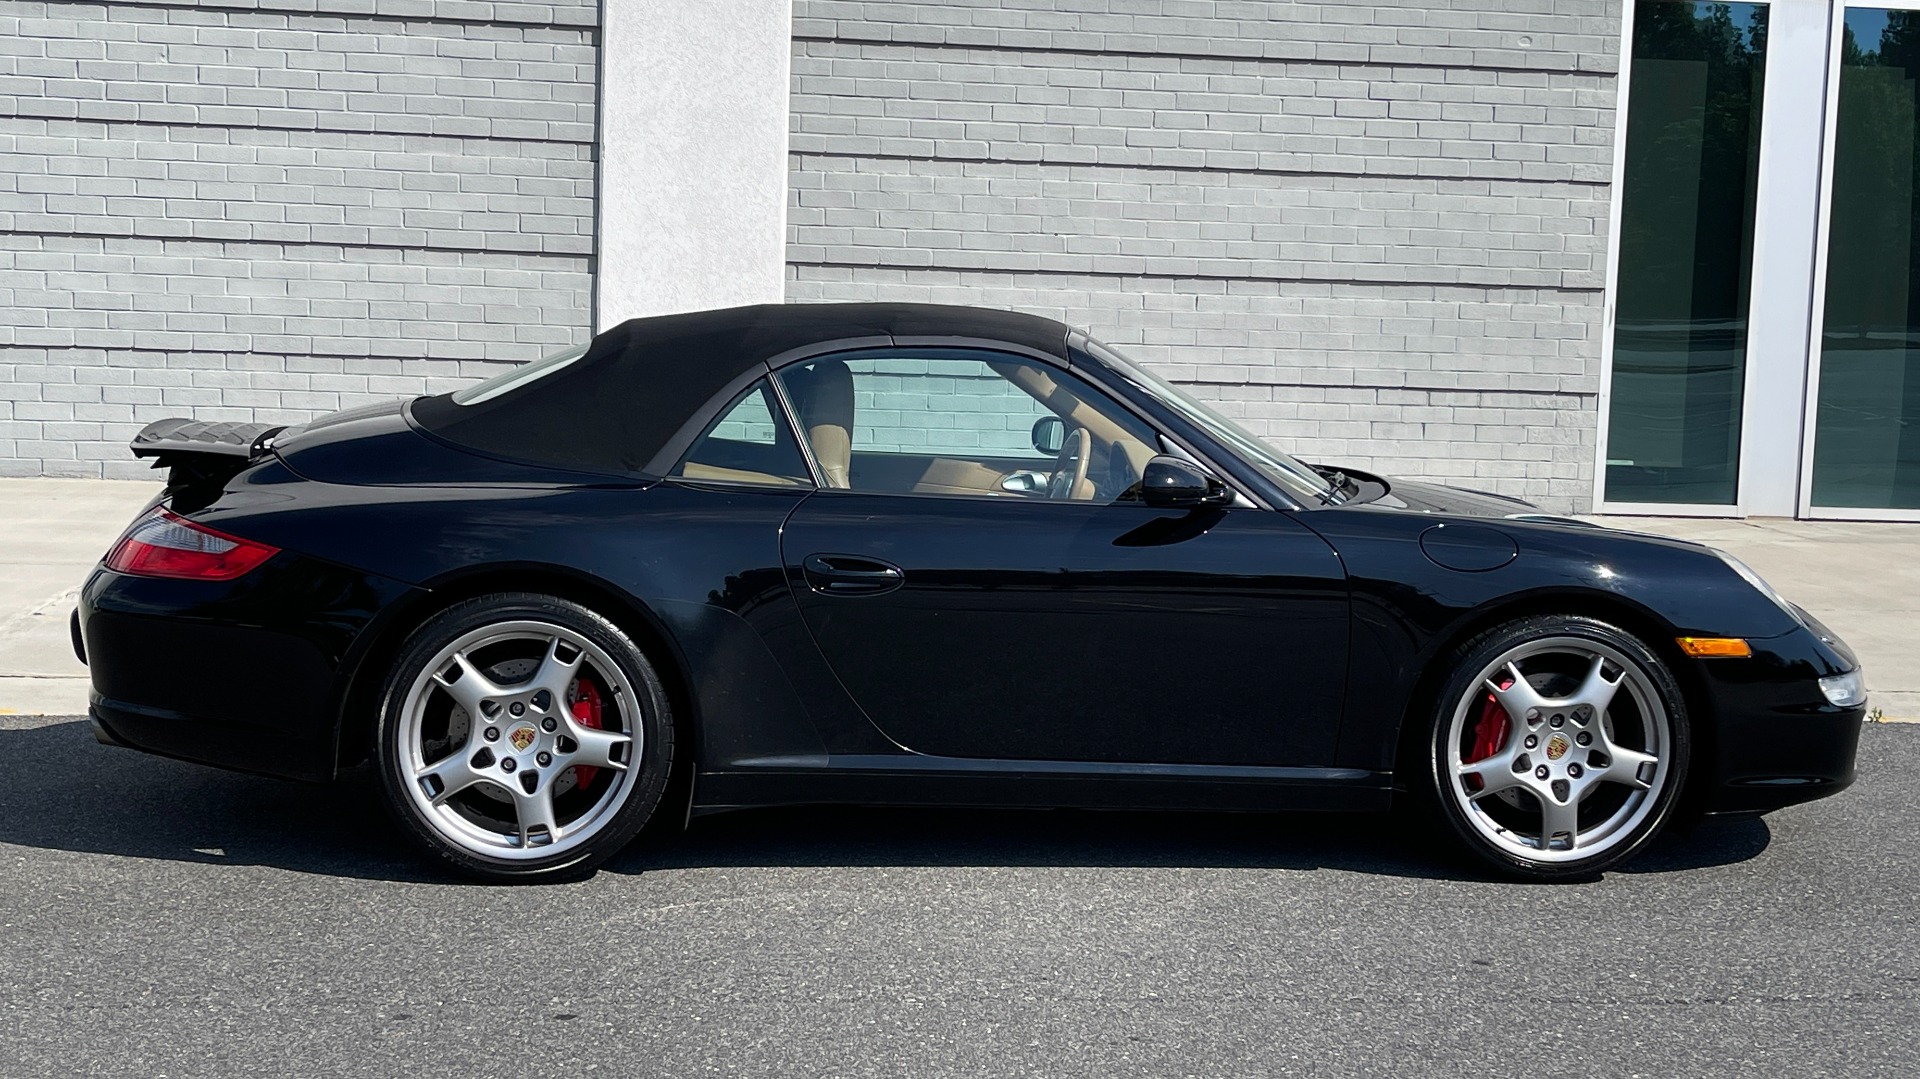 Used 2006 Porsche 911 CARRERA S CABRIOLET / BOSE / CD CHANGER / PWR SEAT PKG / HTD STS for sale $60,999 at Formula Imports in Charlotte NC 28227 45